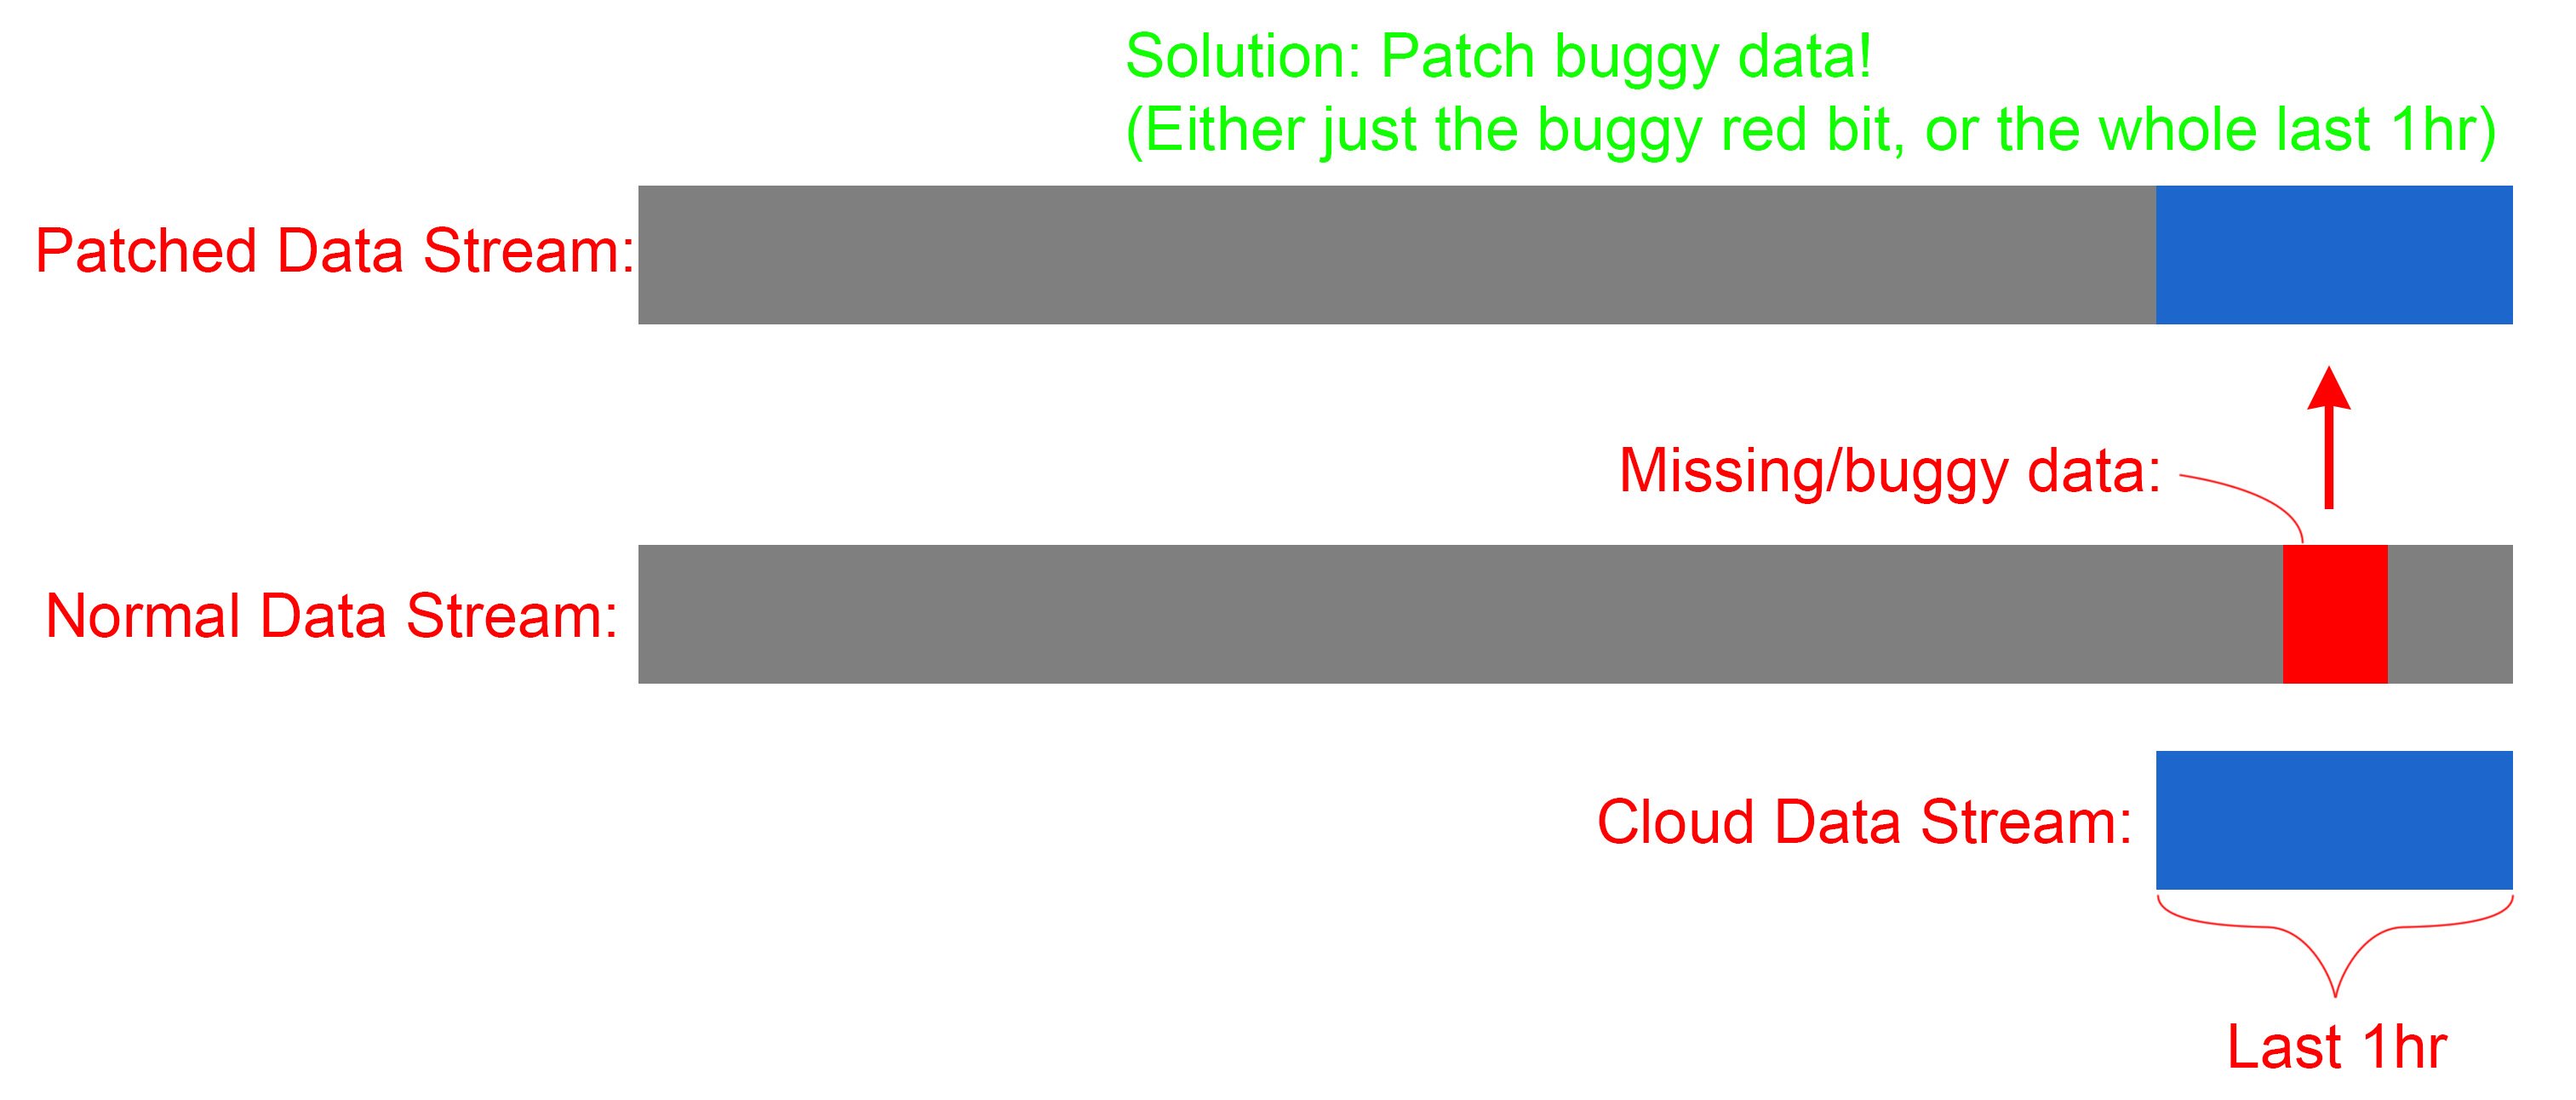 patching buggy data with cloud.jpg